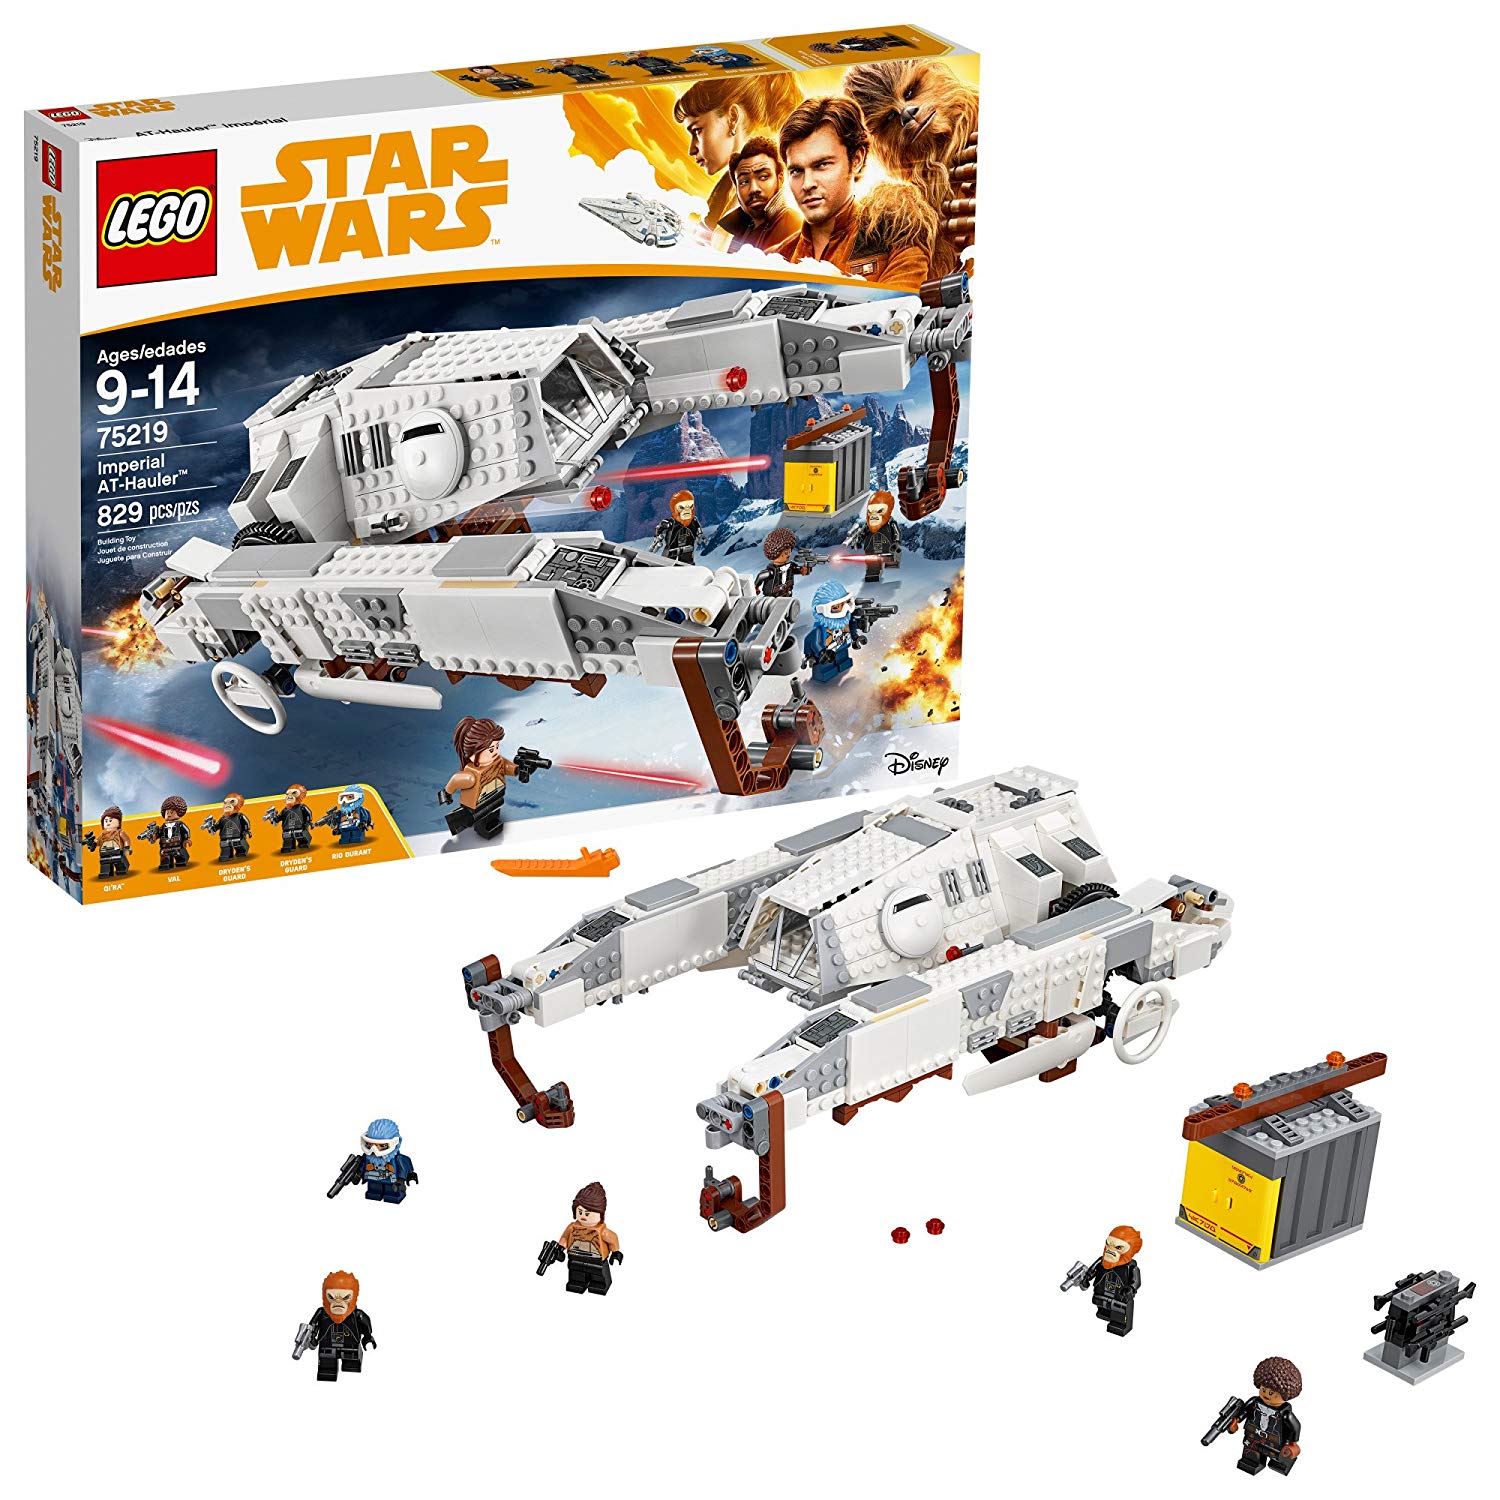 Amazon: LEGO Star Wars Imperial At-Hauler Only $60.98! (Reg $99.99) LOWEST PRICE!